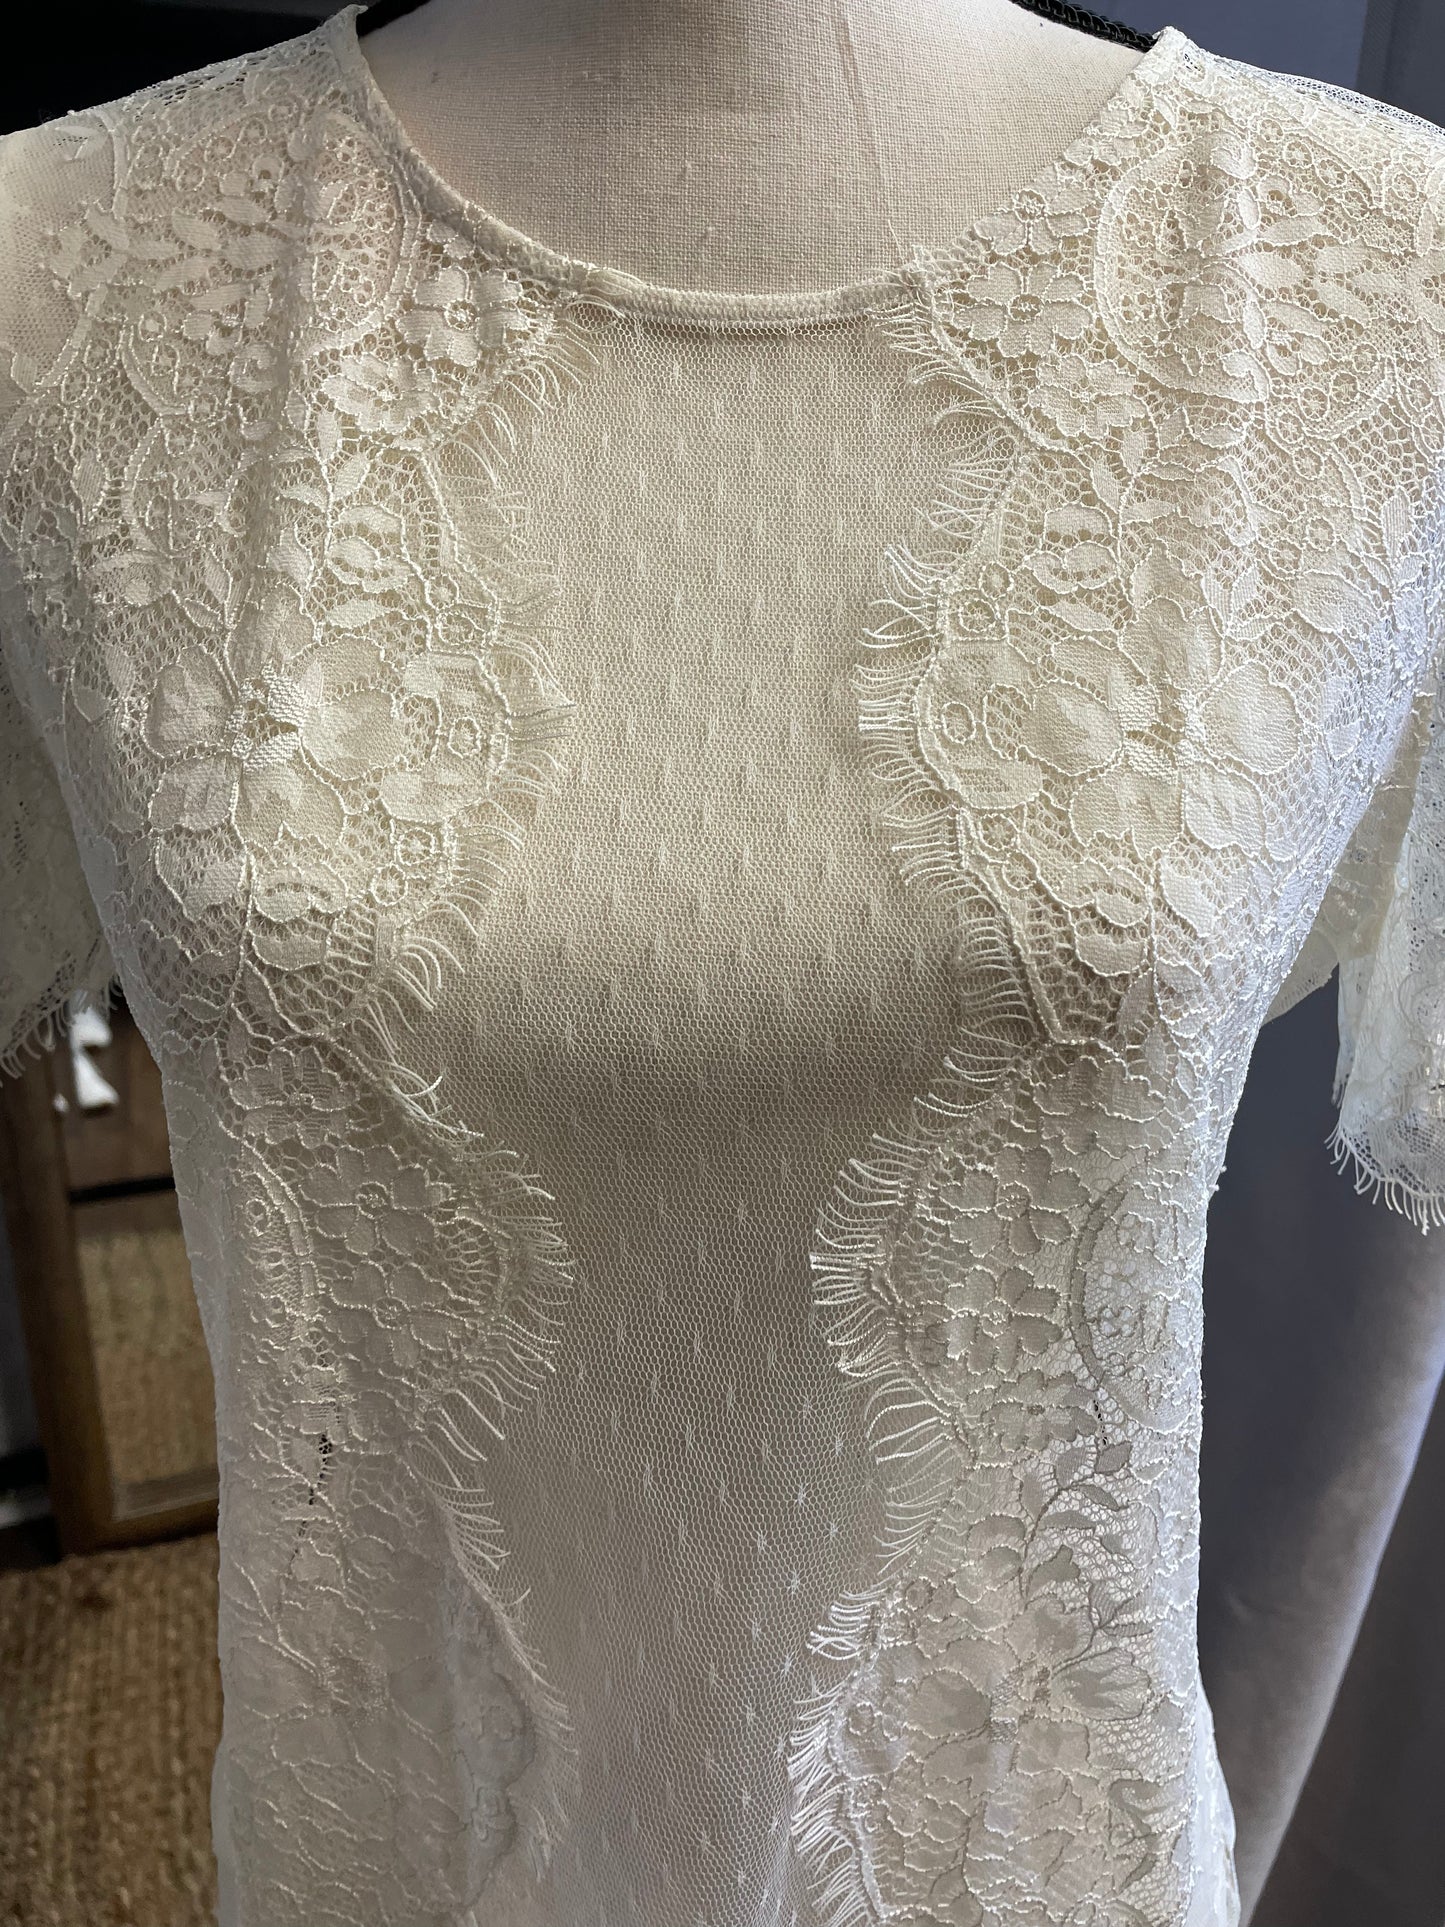 Express Lace Short Sleeved Top (S)